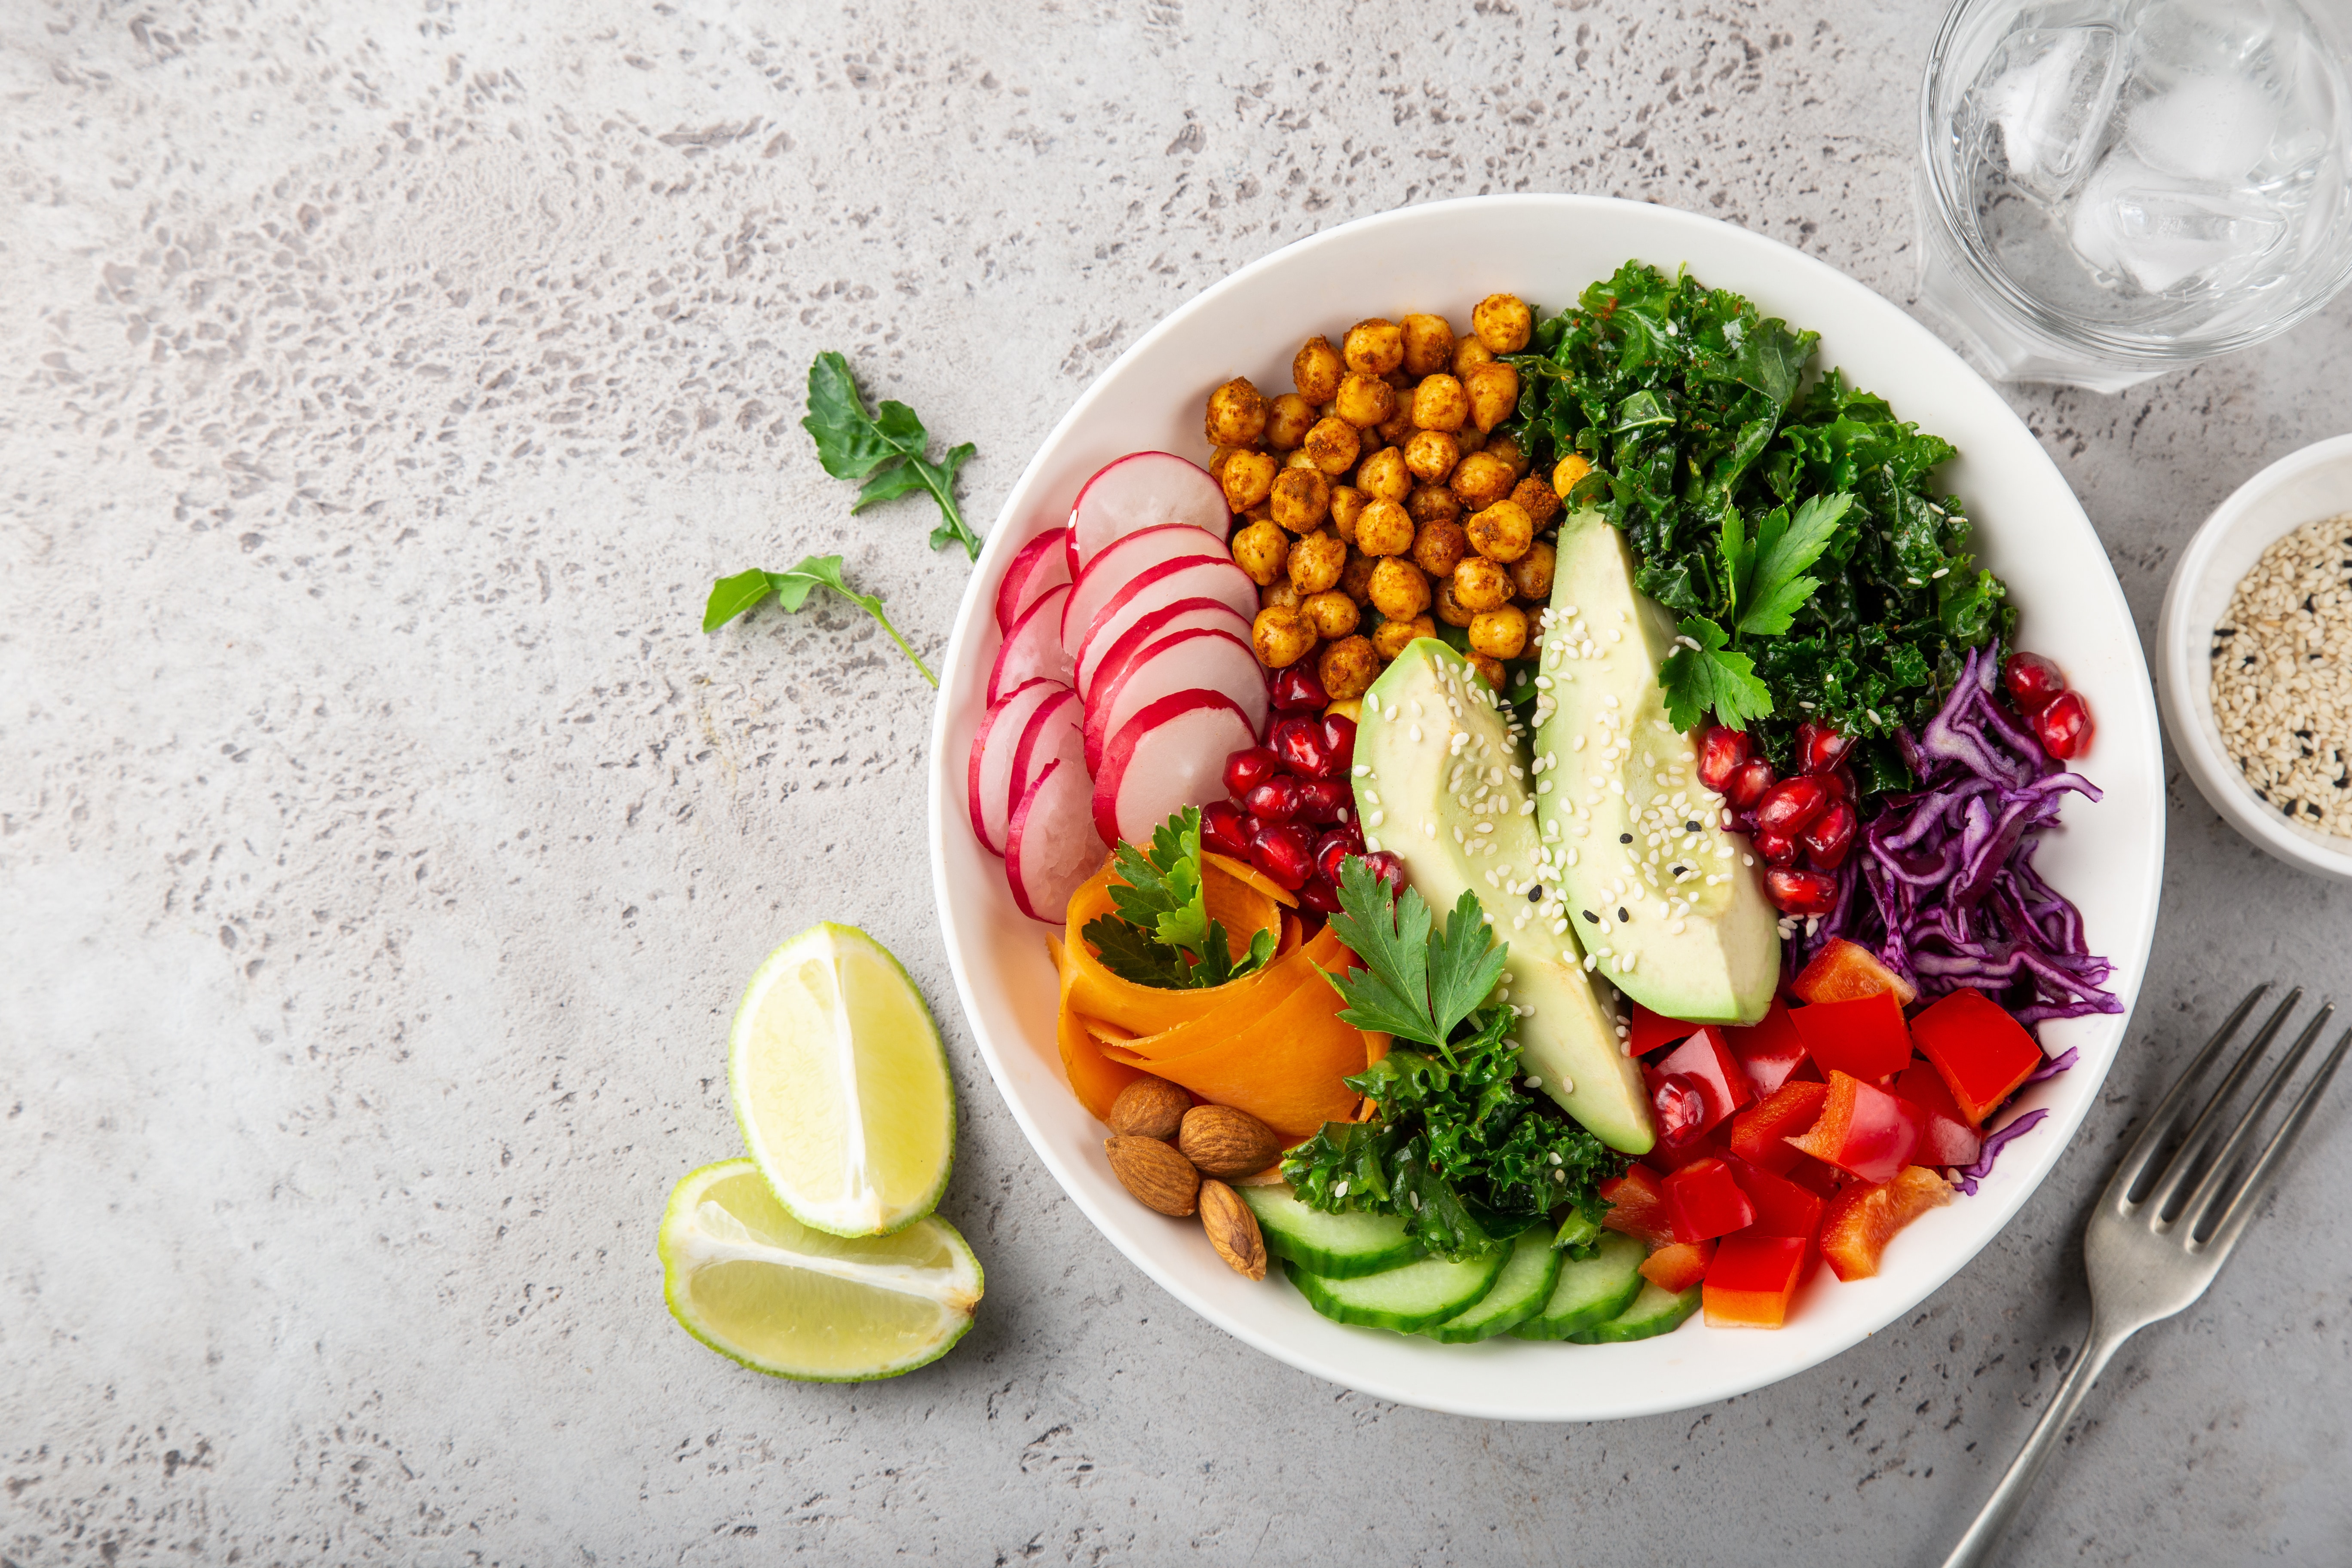 lunch bowl salad with avocado, roasted chickpeas, kale, cucumber, carrot, red cabbage, bell pepper and redish, healthy vegan food, top view, copy space